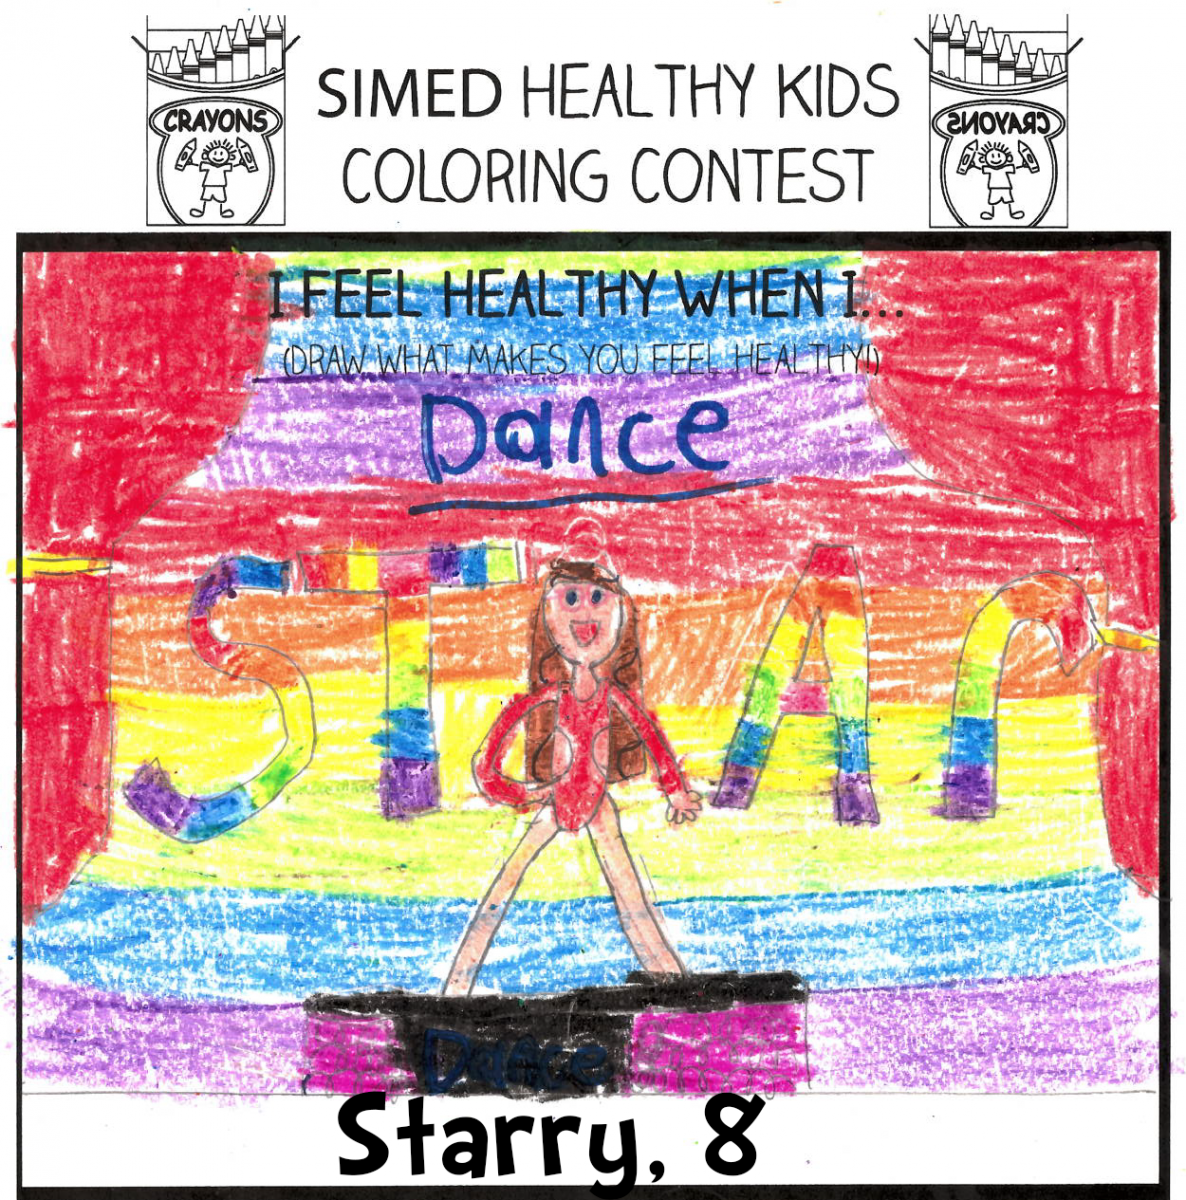 drawing by a girl of what makes her feel healthy which is dancing in front of a rainbow background on a stage